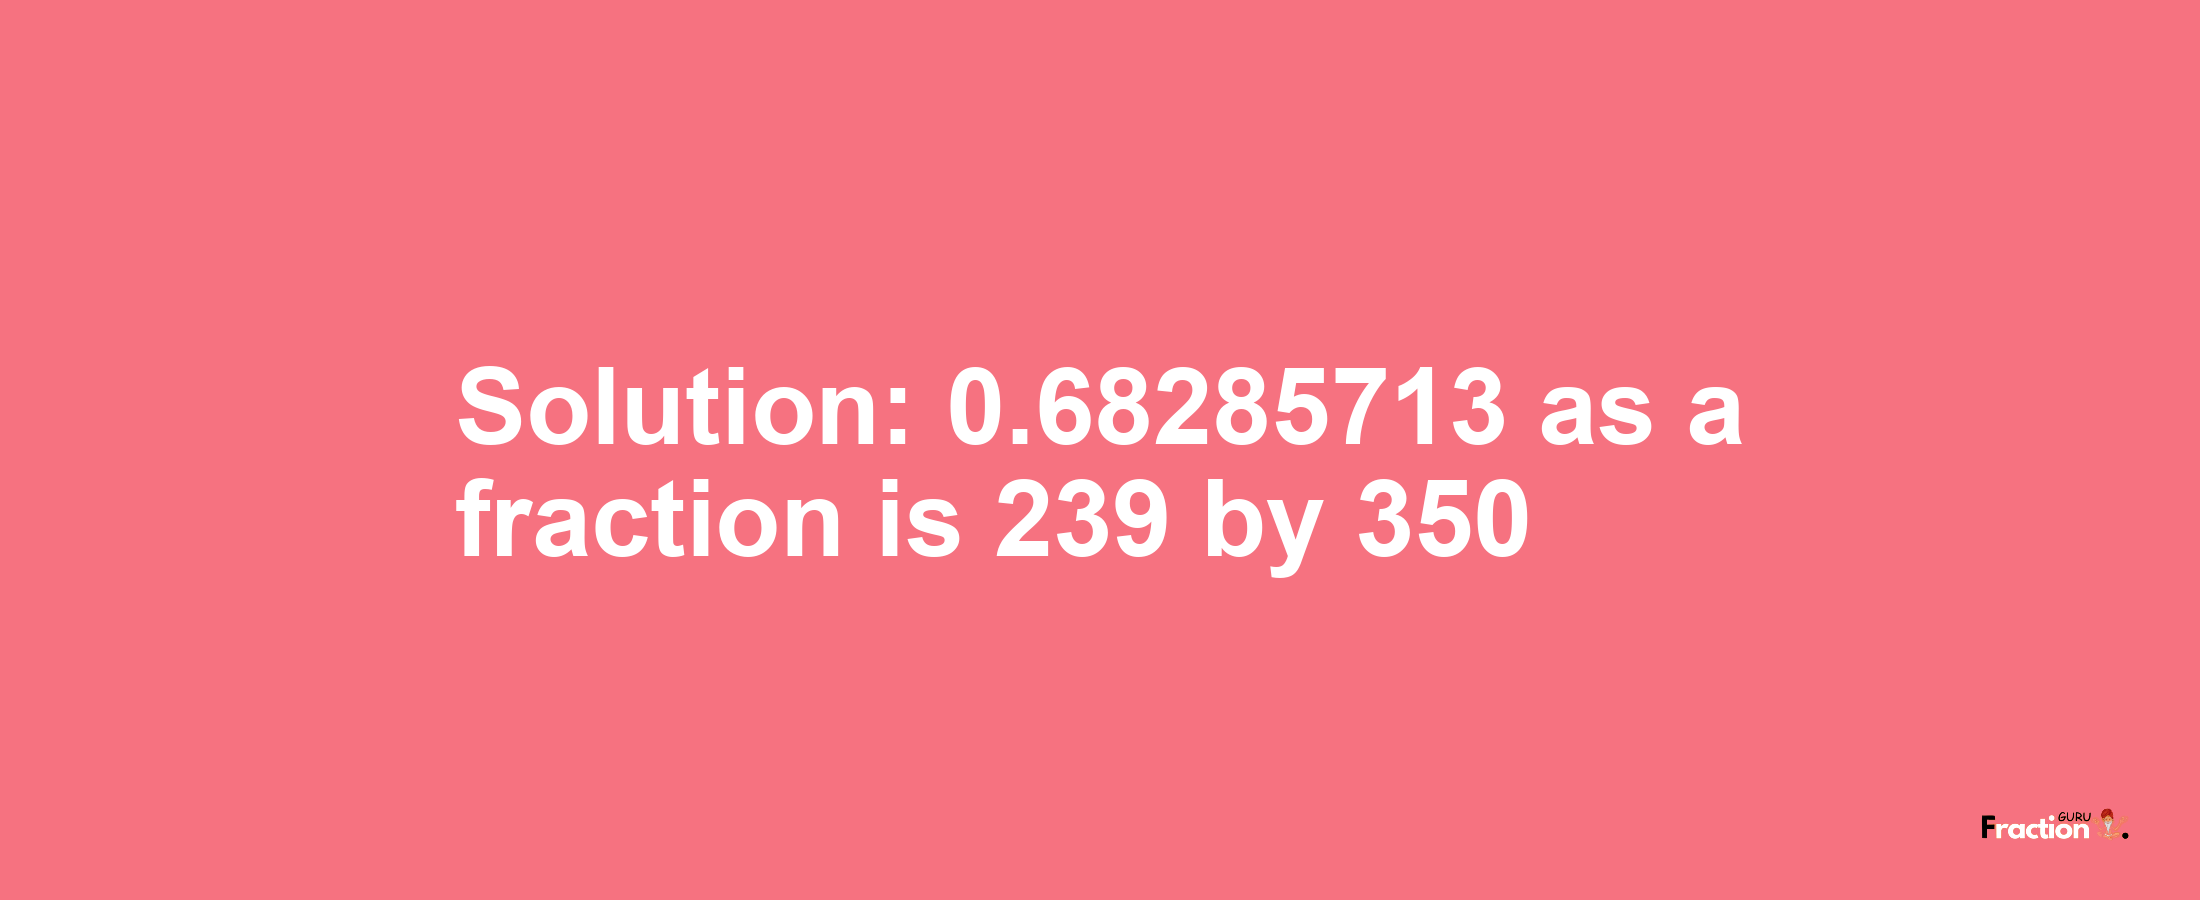 Solution:0.68285713 as a fraction is 239/350